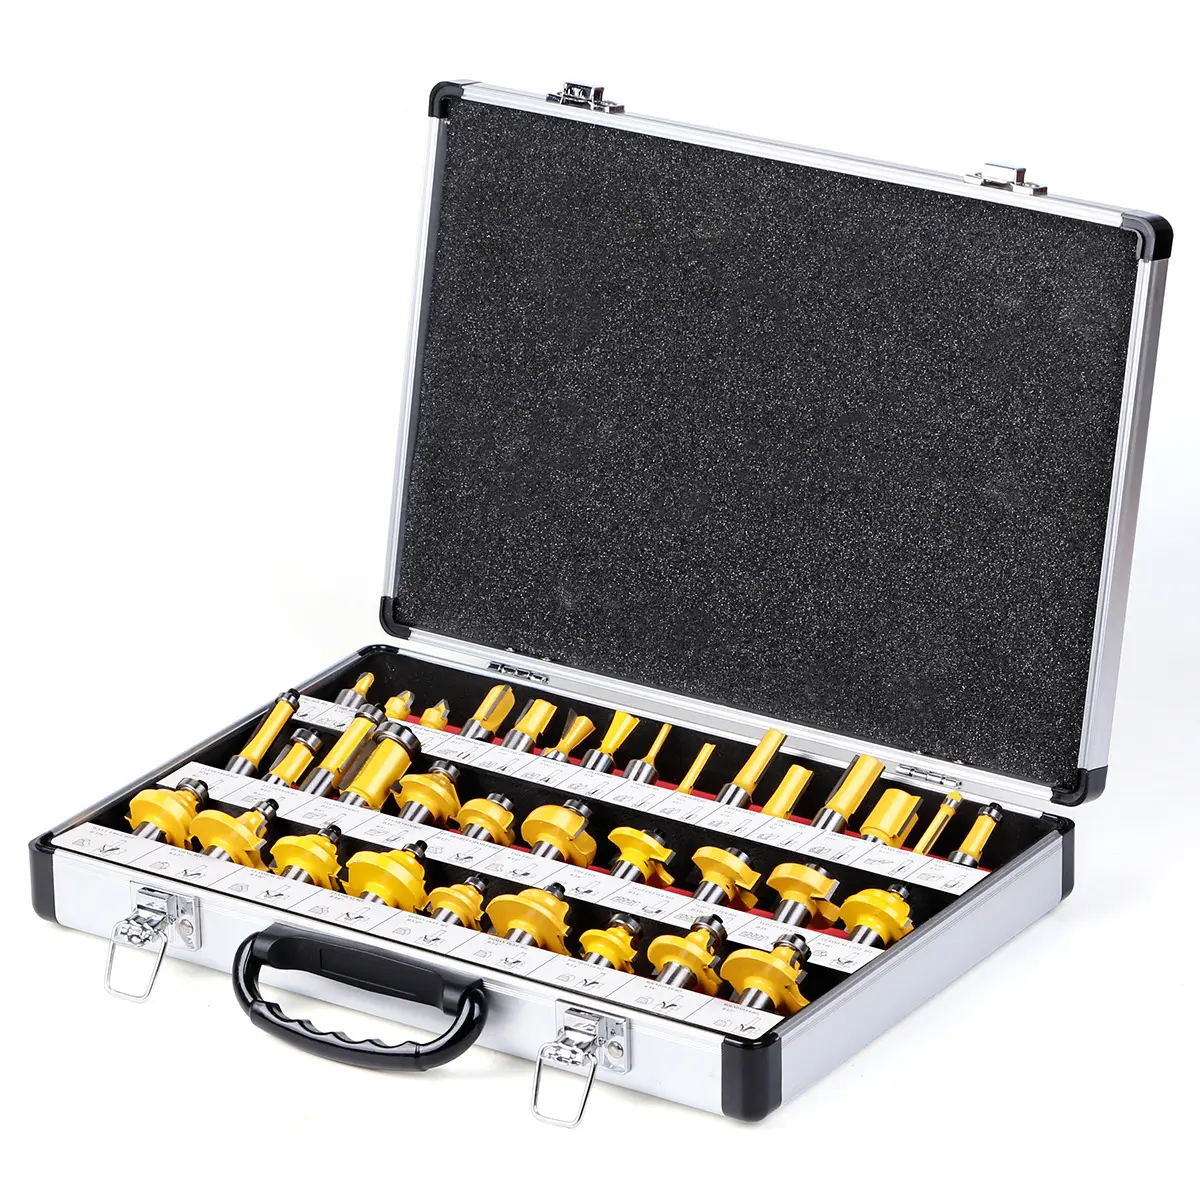 35PCS Router Bits Set Tool Set with Carrying Case Woodworking Tools CNC Router Bits Milling Cutter